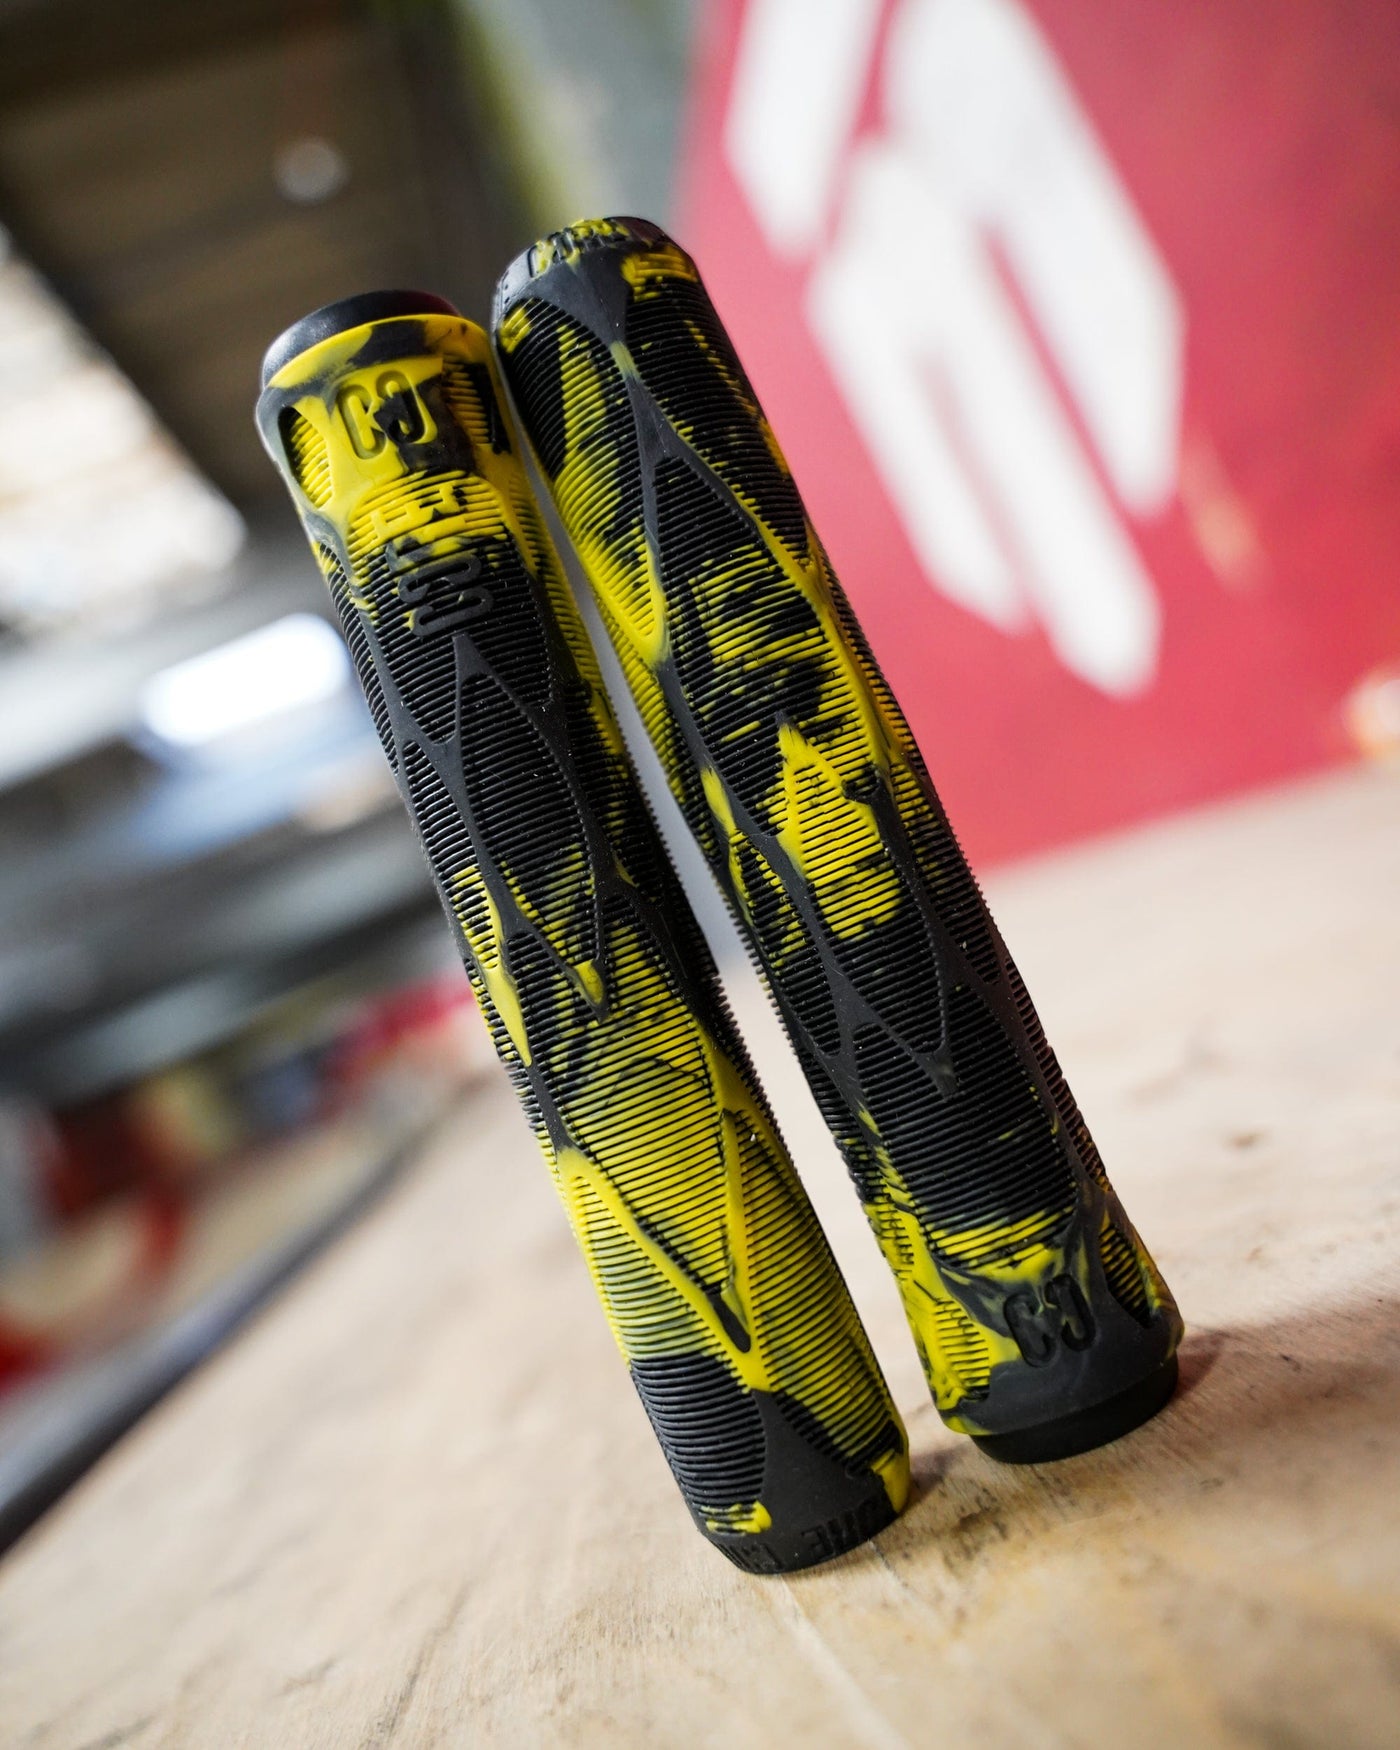 CORE Pro Scooter Handlebar Grips Soft 170mm Wasp Yellow/Black I Scooter Grips Standing Up